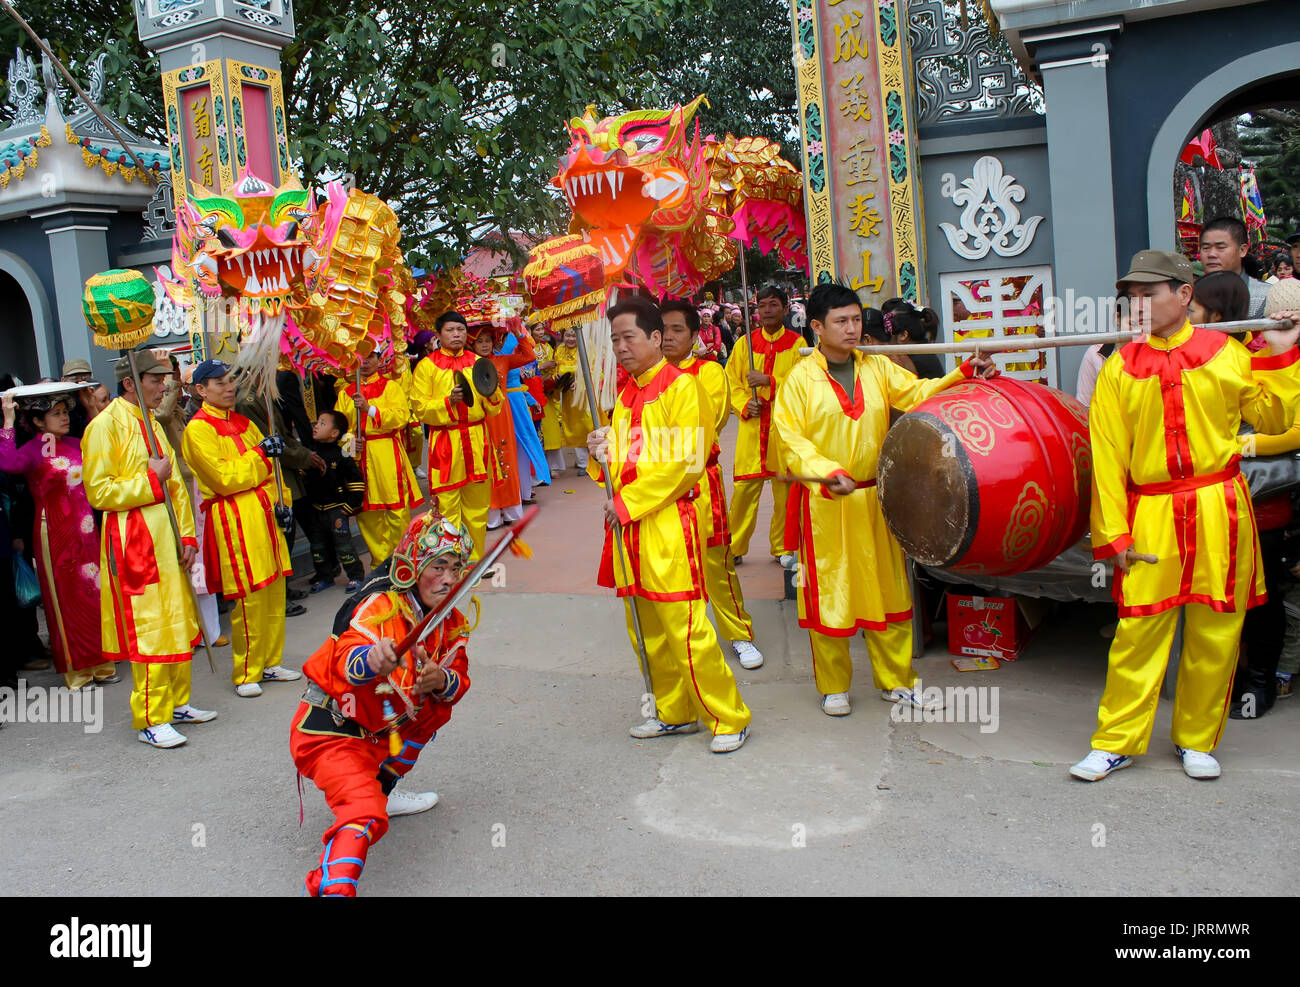 HAI DUONG, VIETNAM, March, 4: Group of people performance dragon dance at Cao temple festival on March, 4, 2013 in Hai Duong, Vietnam. Dragon dance is Stock Photo